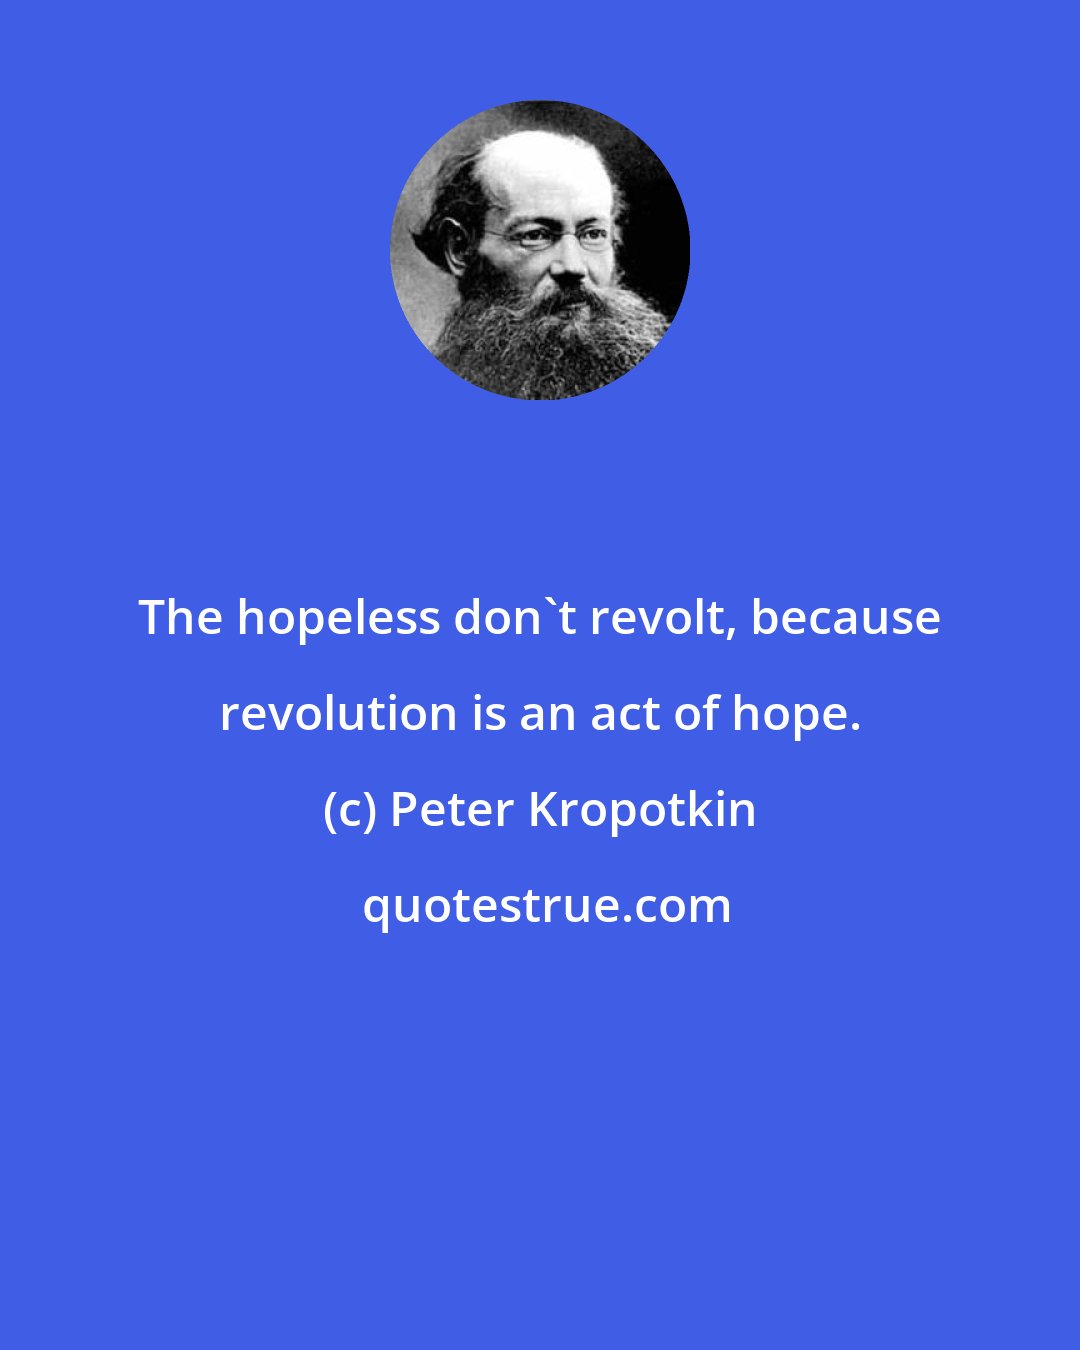 Peter Kropotkin: The hopeless don't revolt, because revolution is an act of hope.